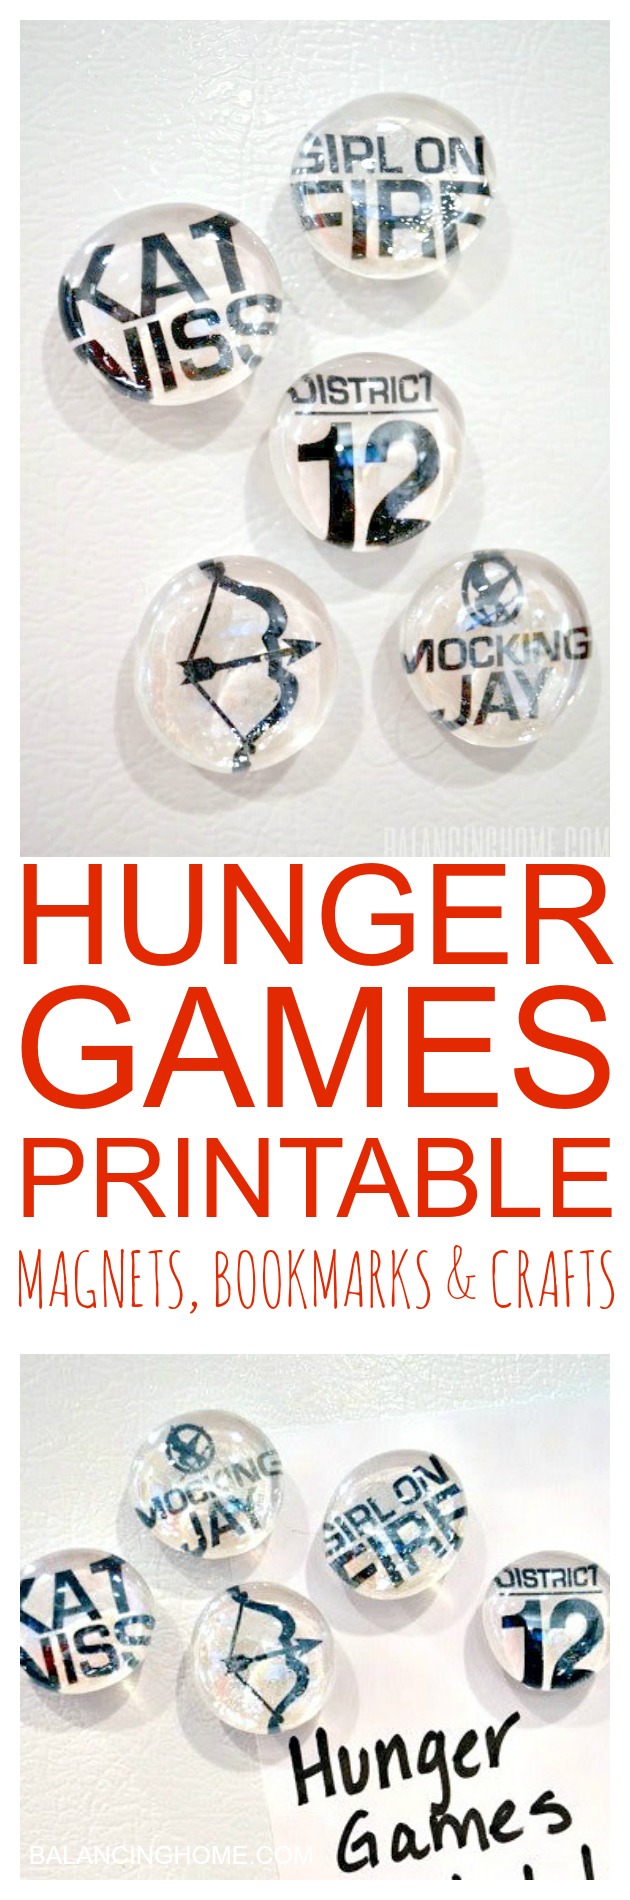 A Hunger Games printable-- perfect for DIY magnets, bookmarks and other crafts.